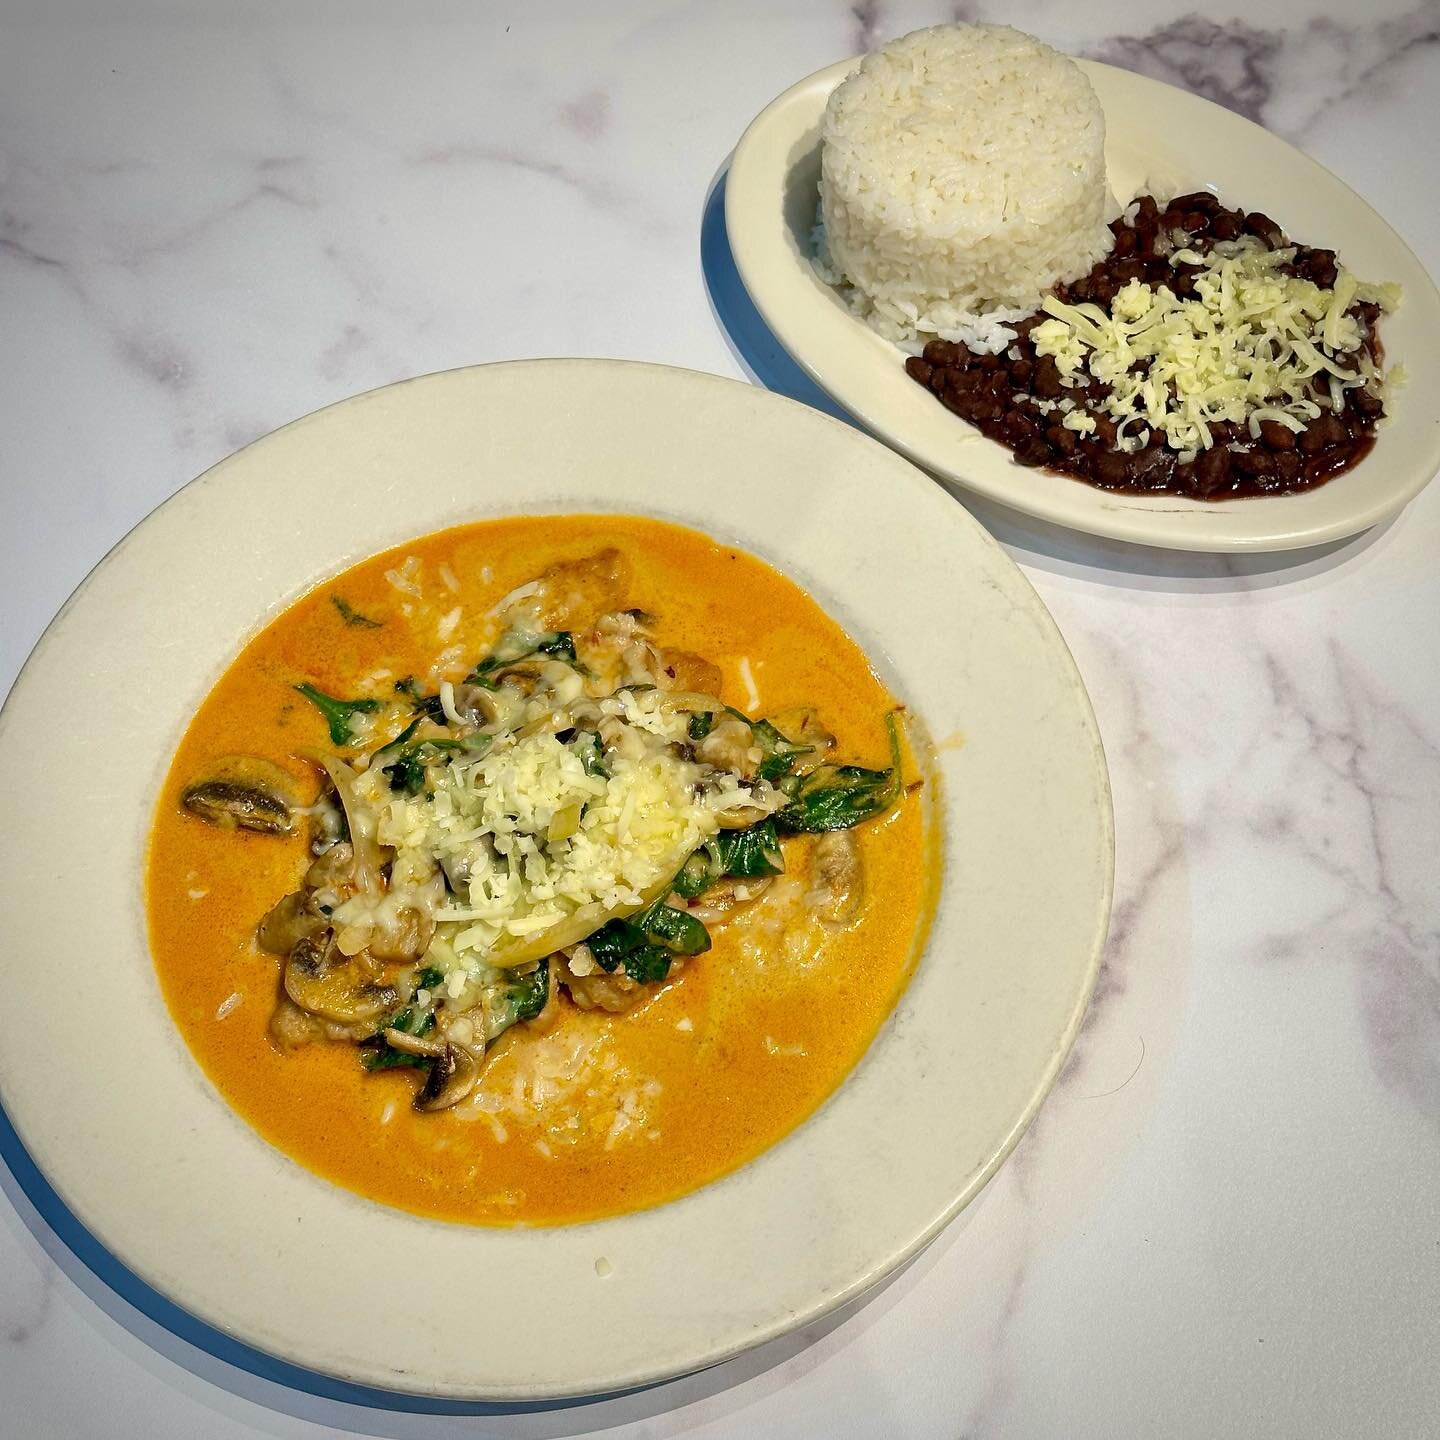 WEEKEND SPECIAL ALERT! Puerco Chipotle in a spicy creamy chipotle salsa with slices of mushrooms, white onion and fresh spinach. Served with rice &amp; black beans.
#familyrestaurant #1994 #mexicanrestaurant #merrimackvalley